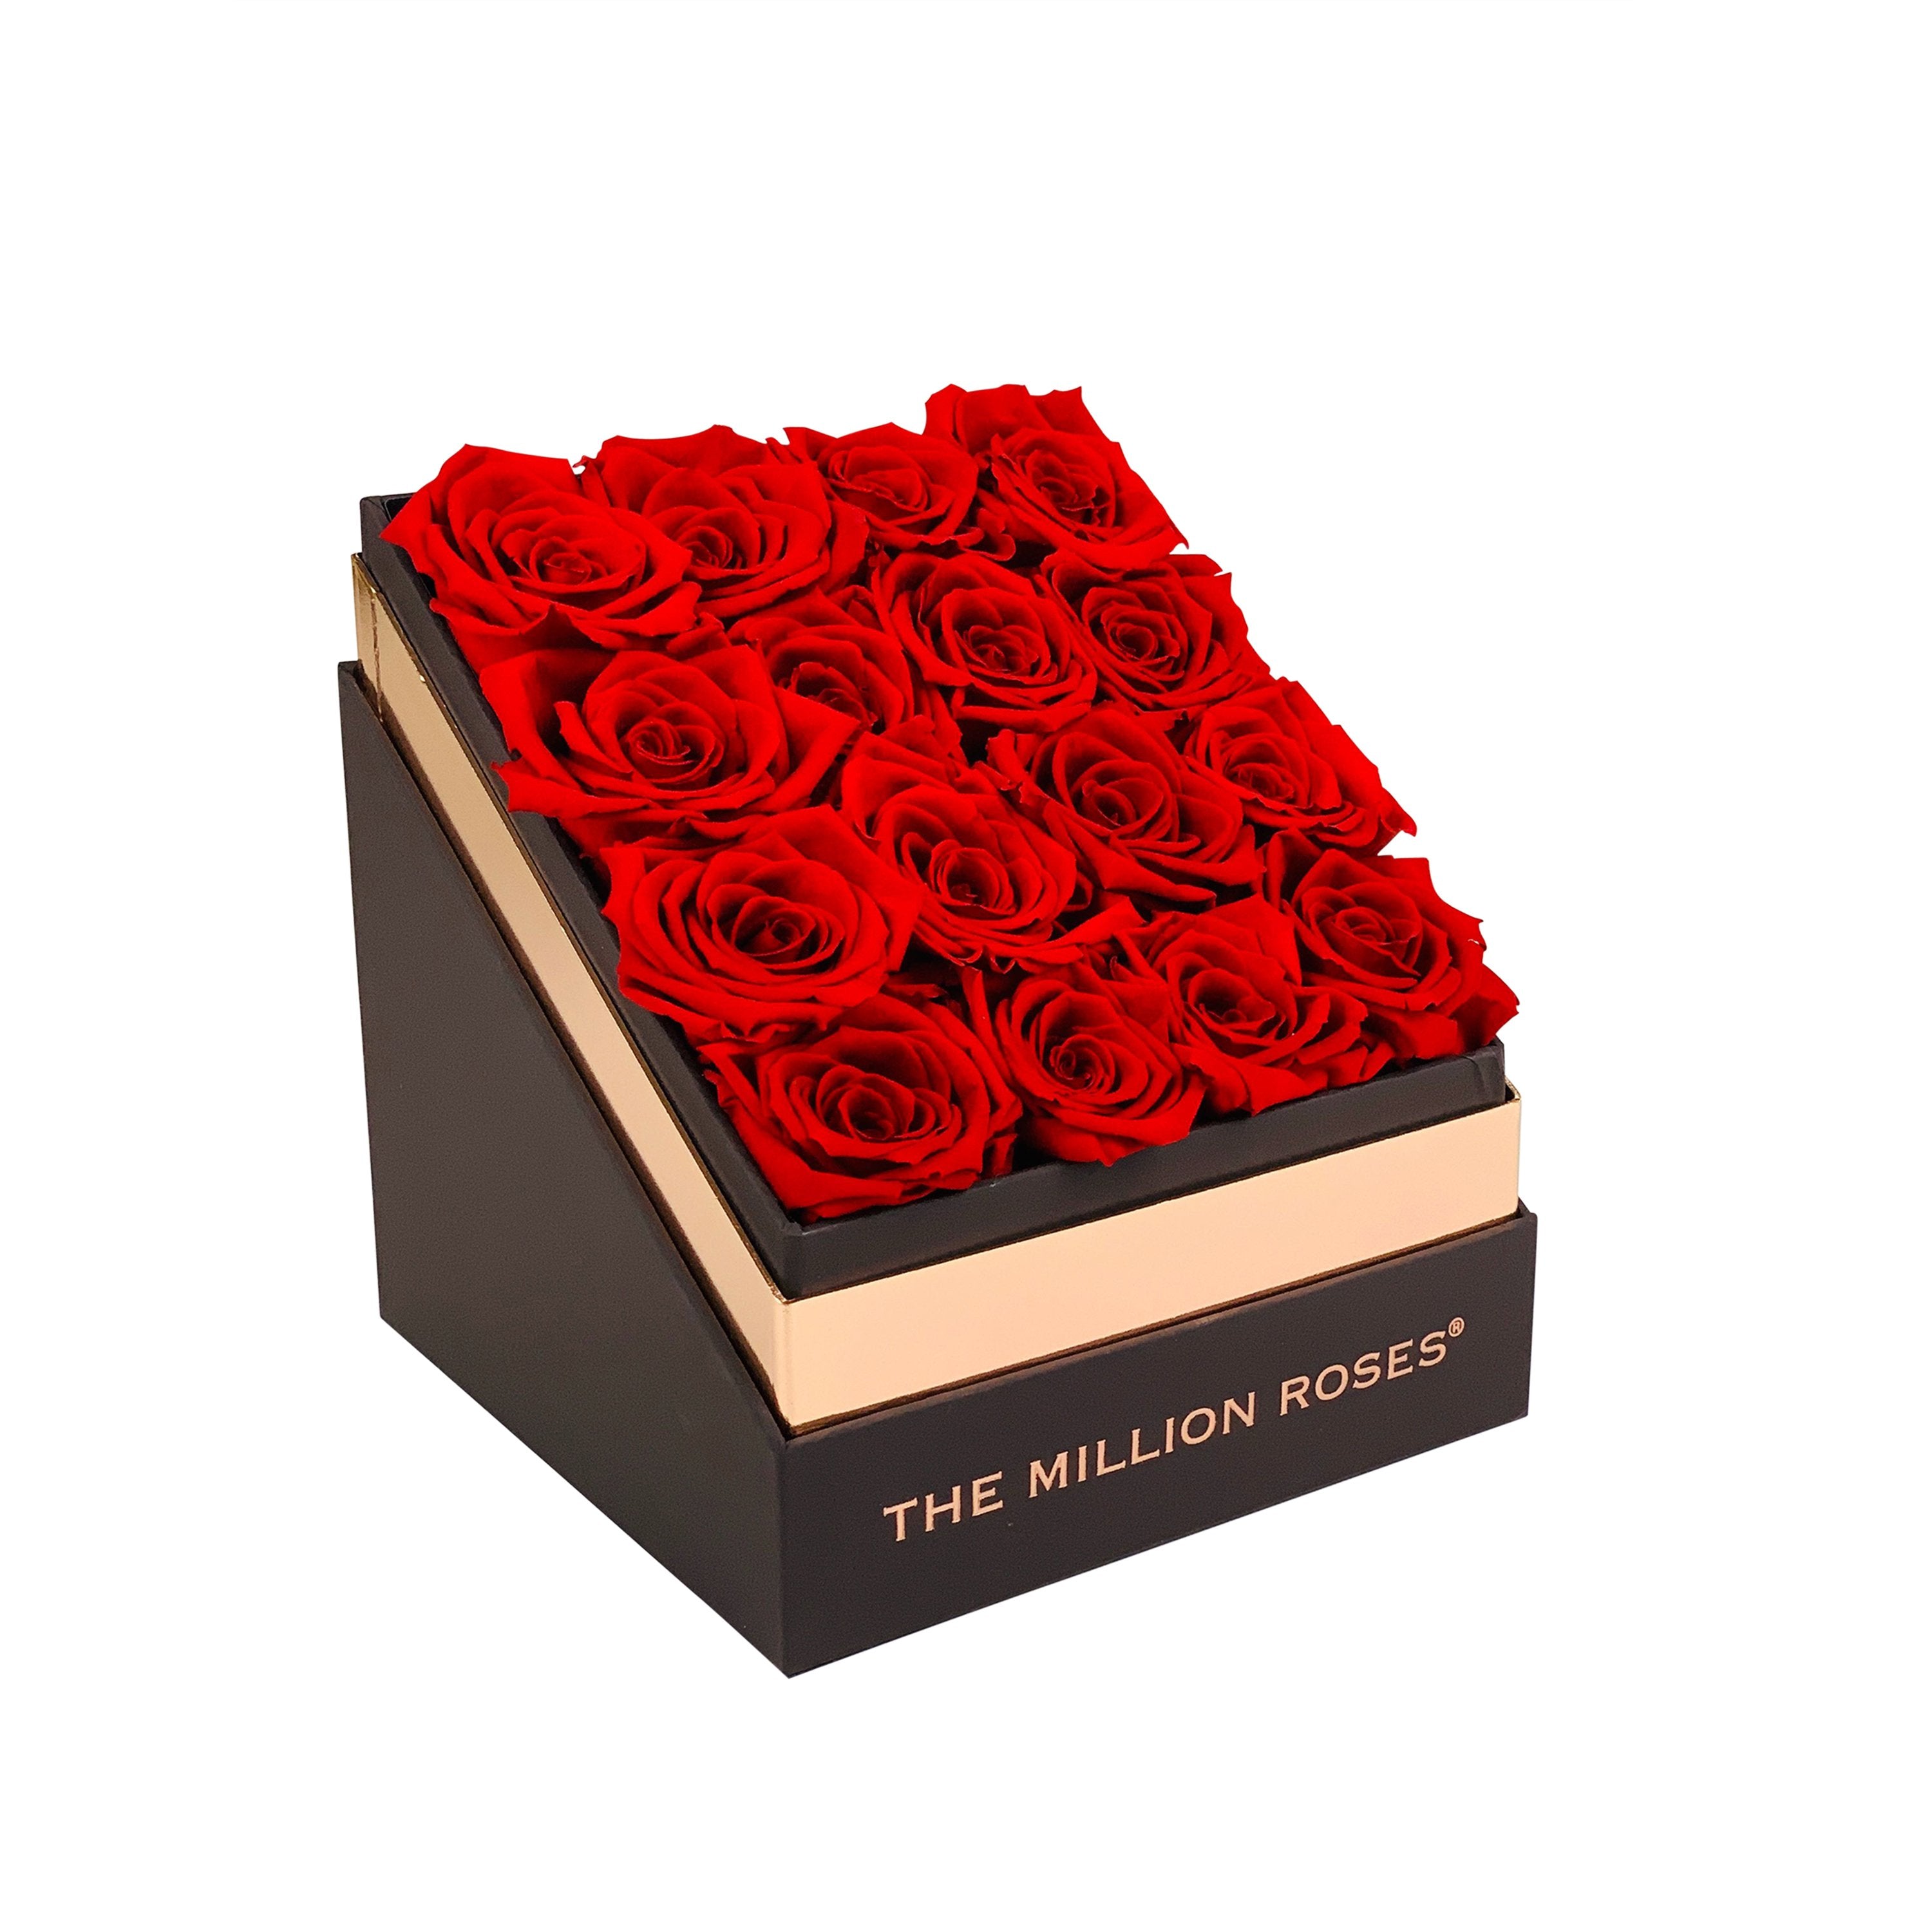 The Square - Coffee Box - Red Roses